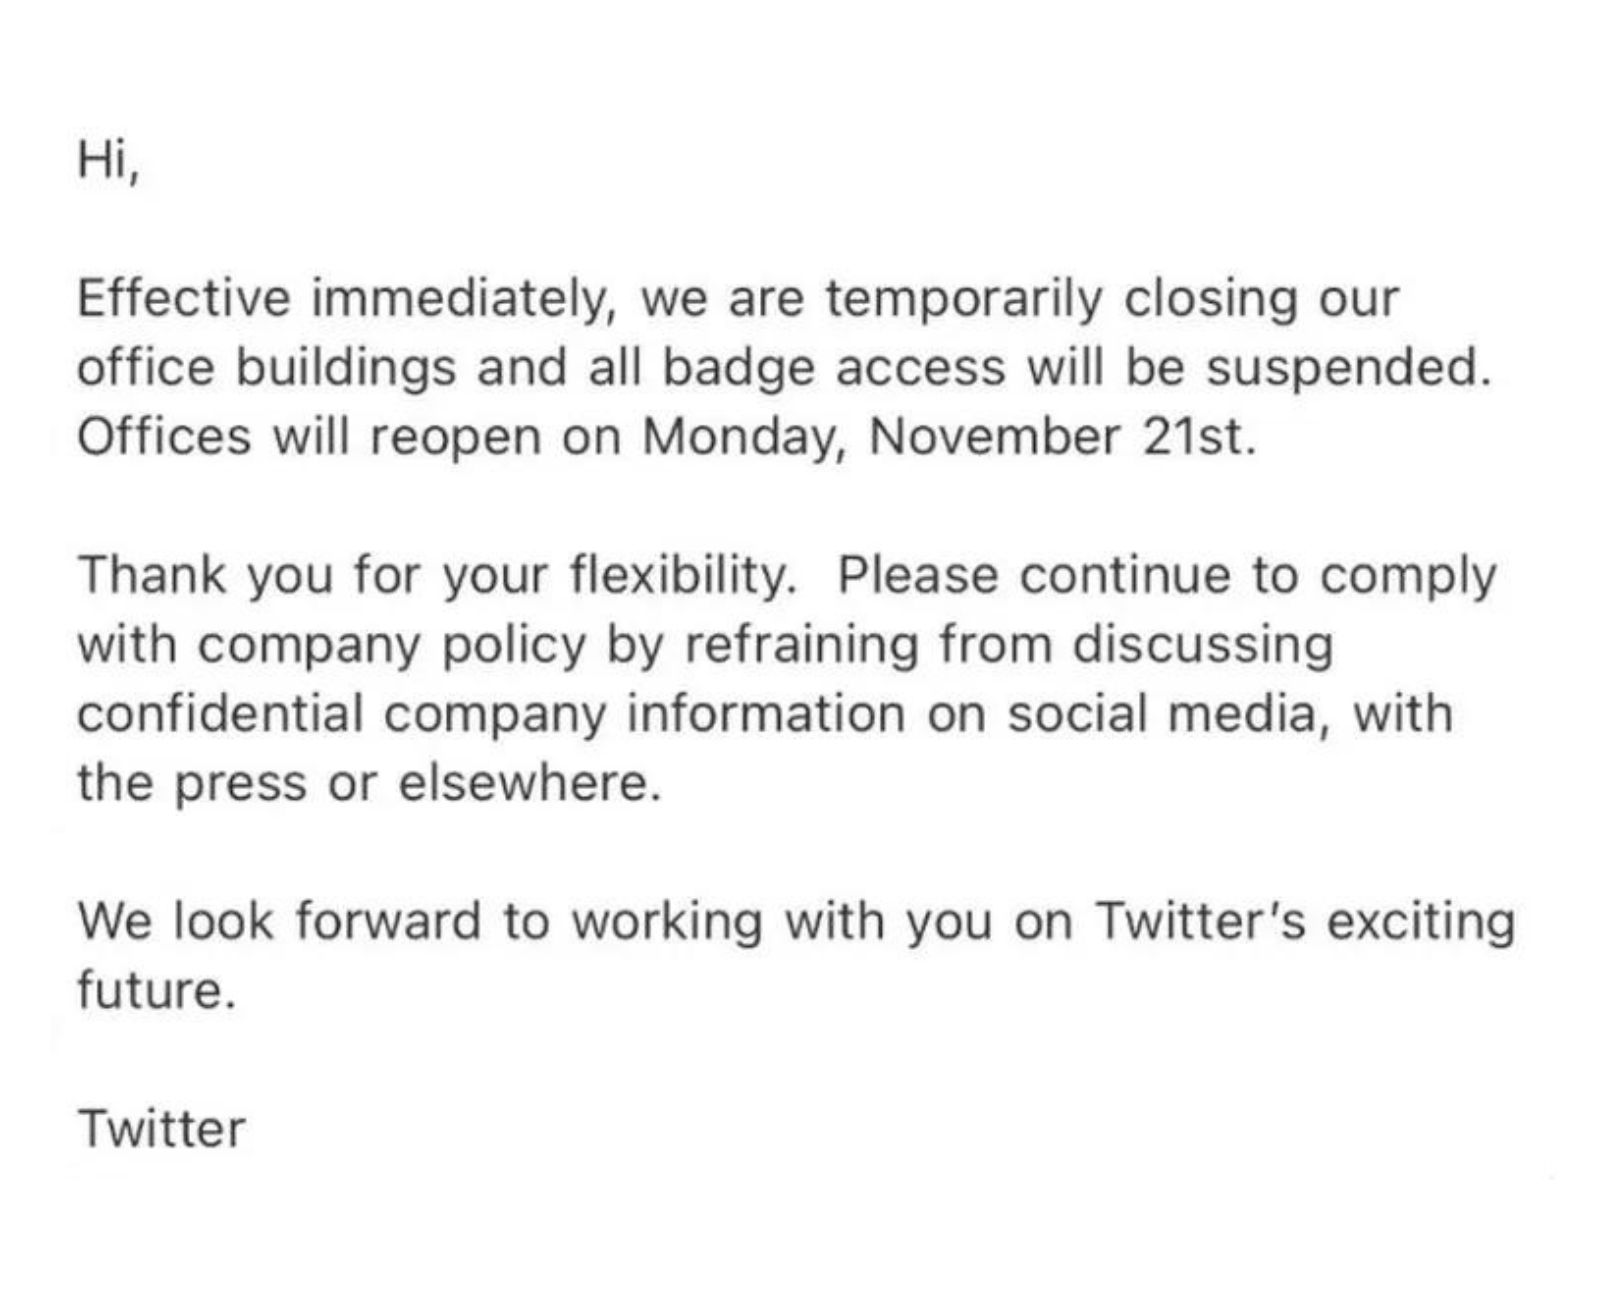 letter-to-twitter-staff.jpg?impolicy=web